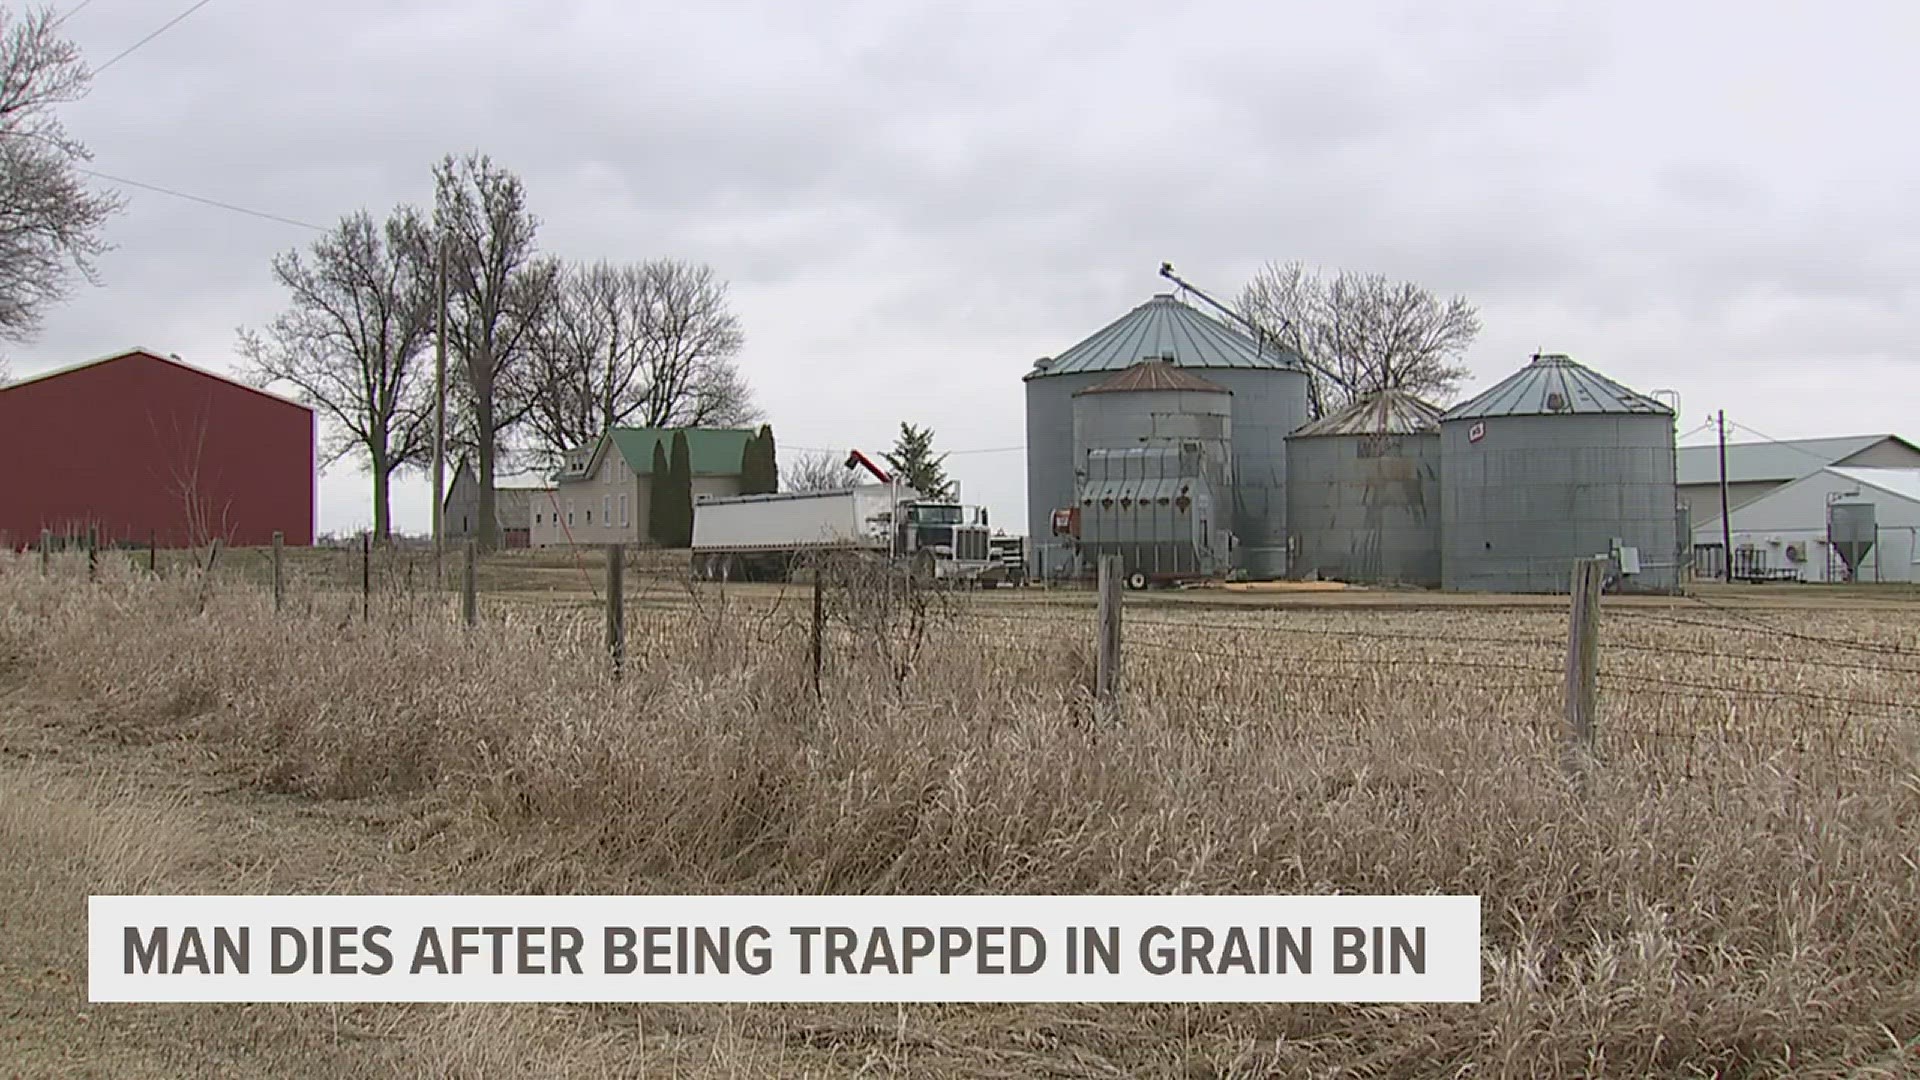 Police investigate the death of a Clinton man who fell into a grain bin. Bill banning trans-students from their preferred restrooms awaits Gov. Reynolds' signature.